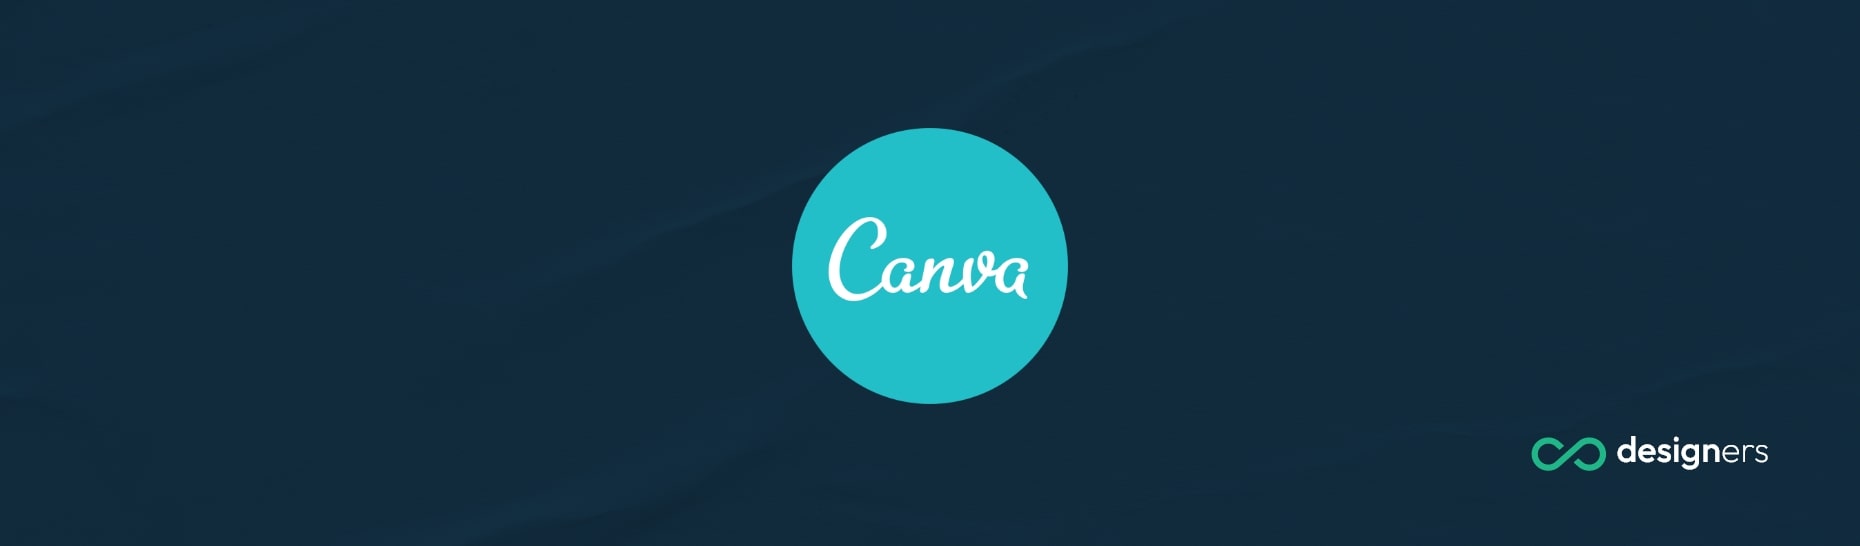 How Do I Remove Myself From a Team on Canva?